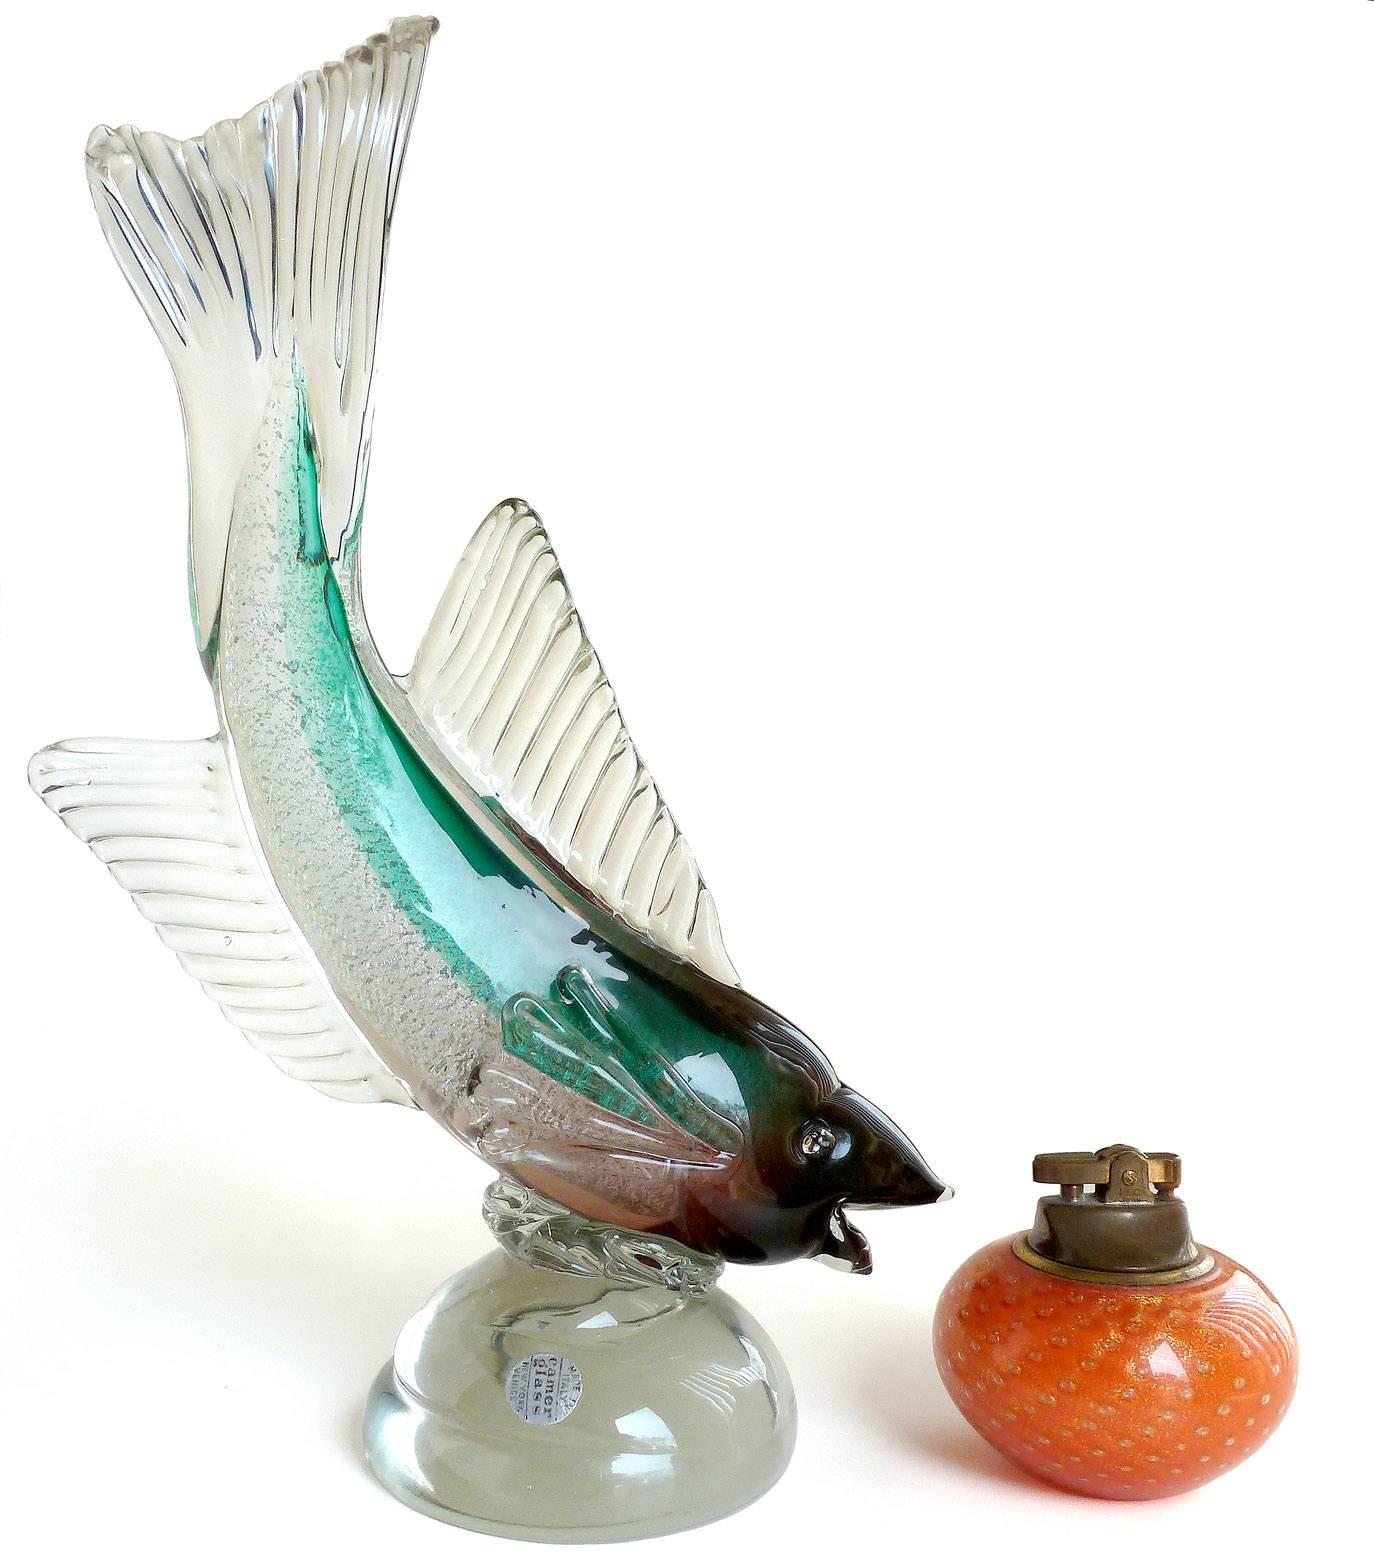 Free shipping worldwide! See details below description.

Large Murano hand blown silver flecks fish in Sommerso purple and green art glass sculpture. Documented to designer Archimede Seguso. The fish is well detailed with a natural appearance. It